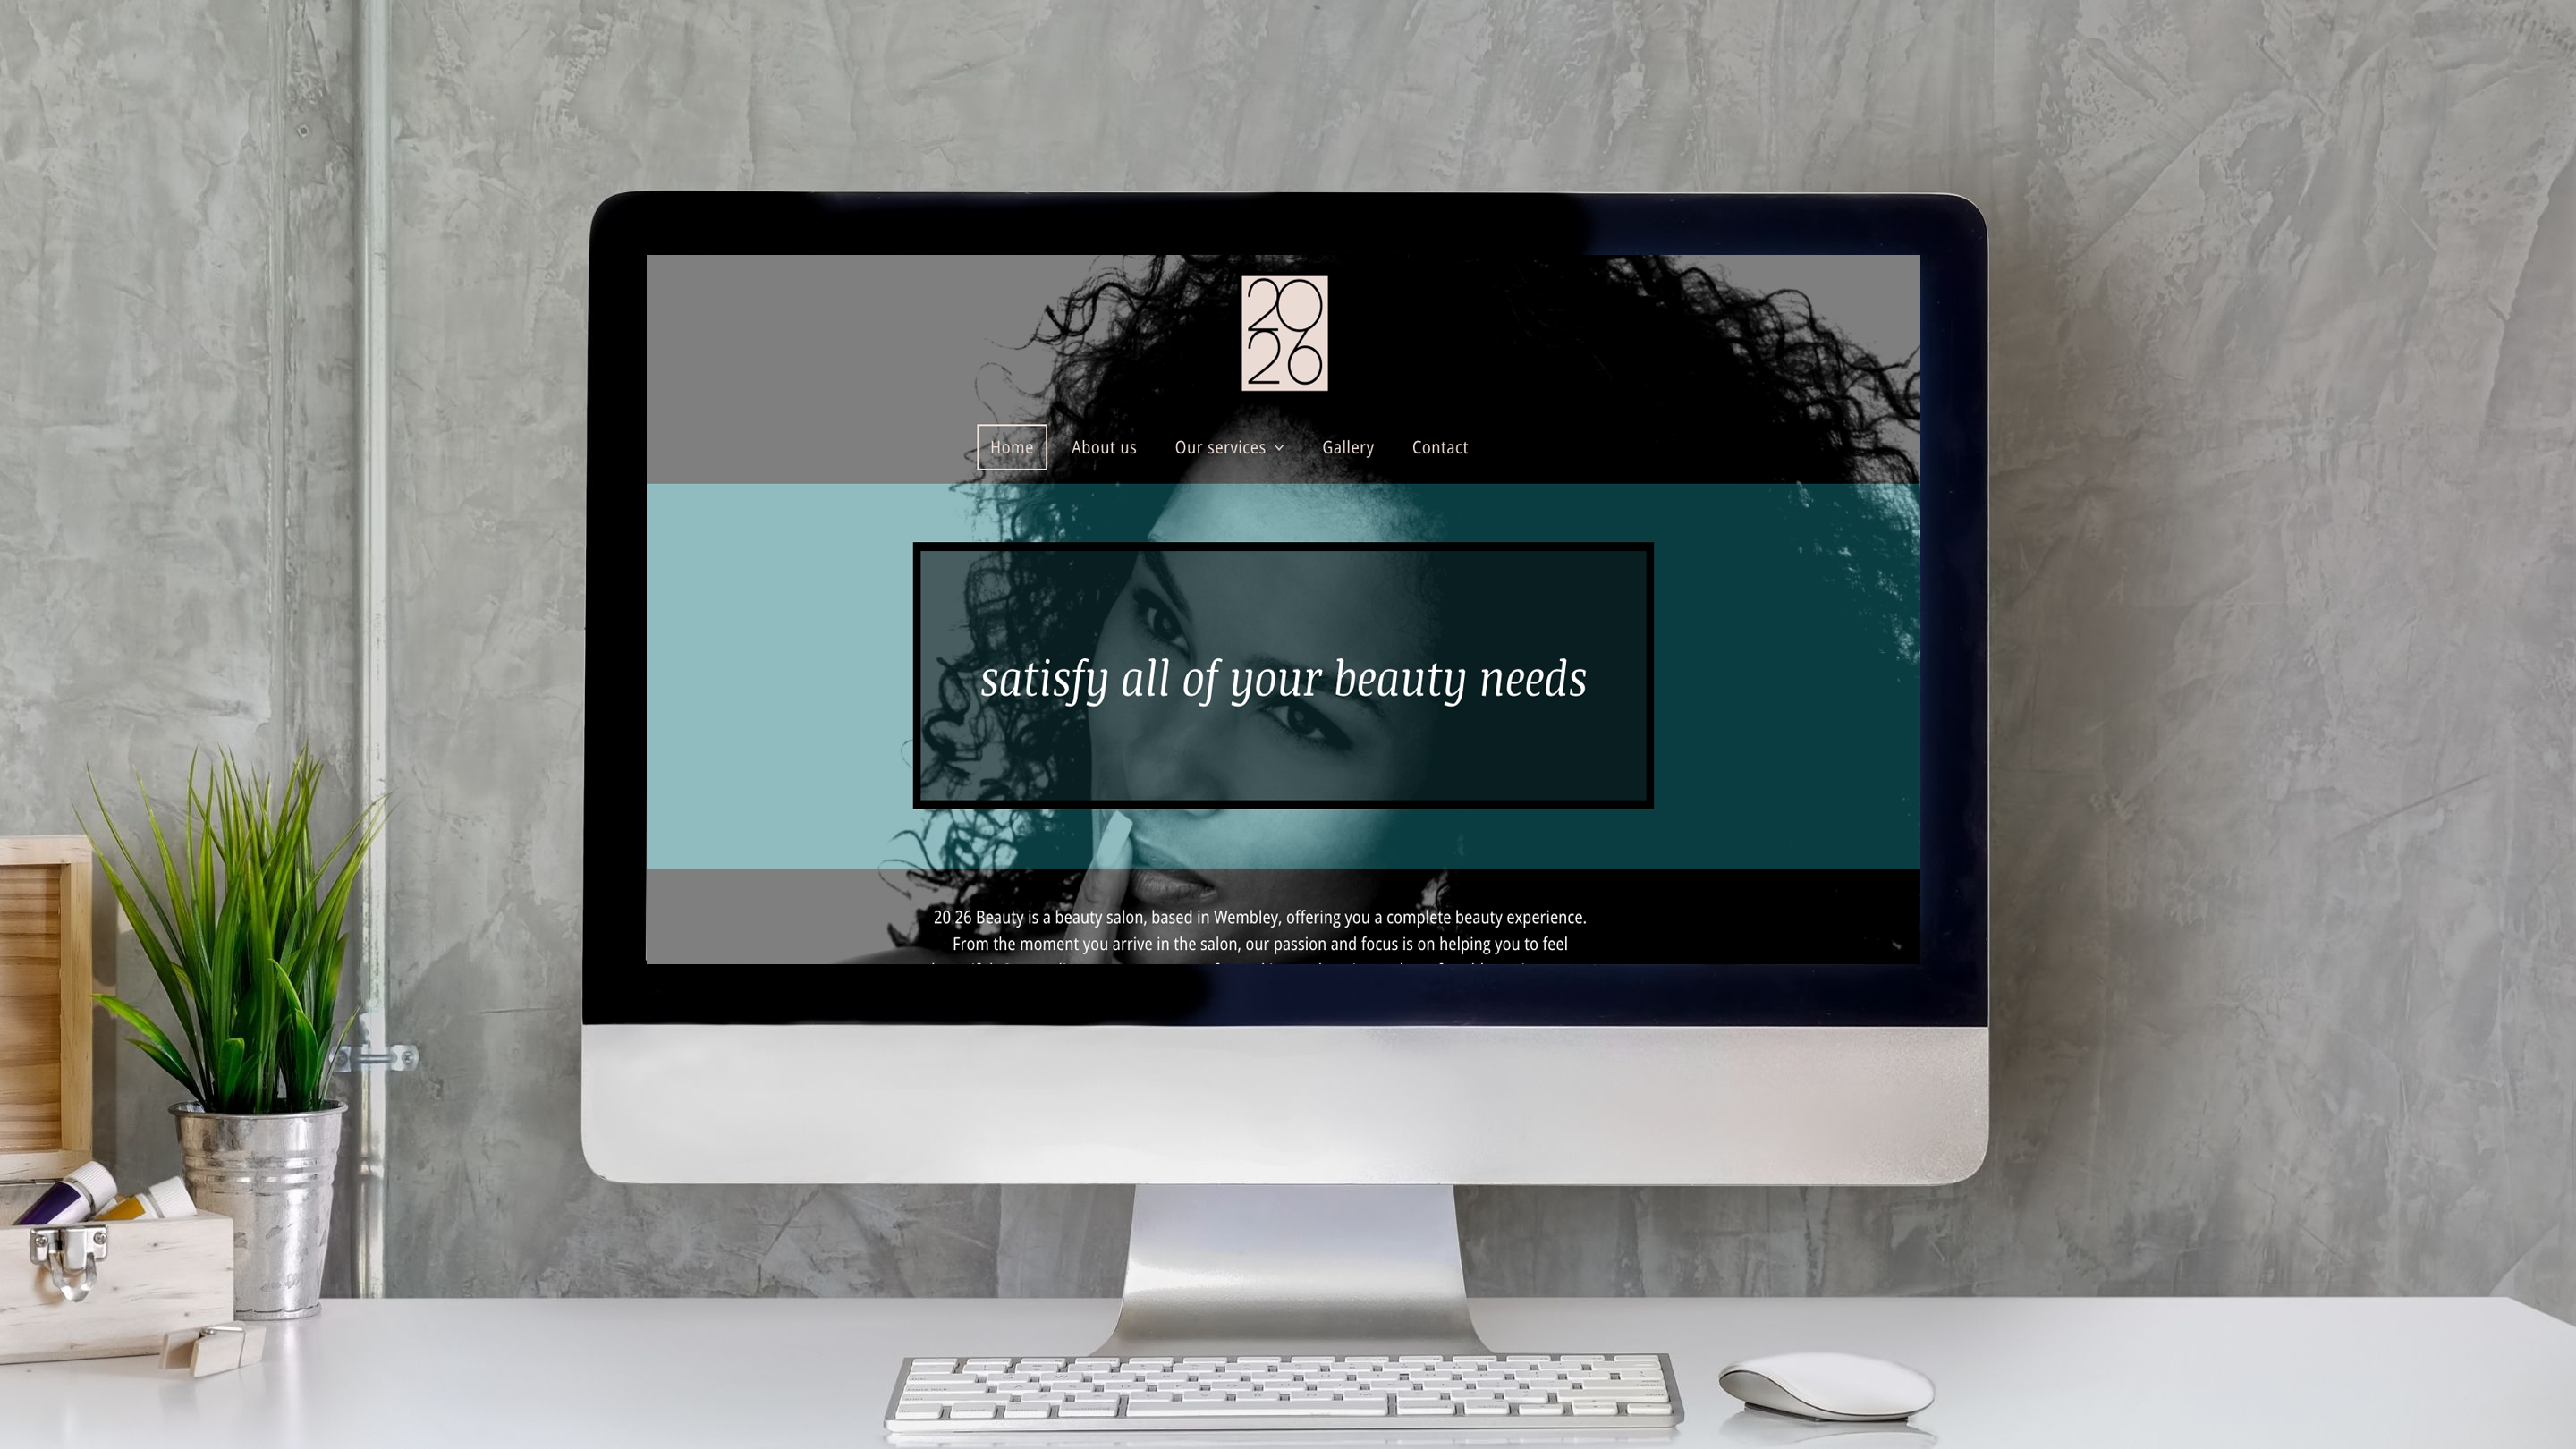 2026 Beauty website by I AM SQUARED